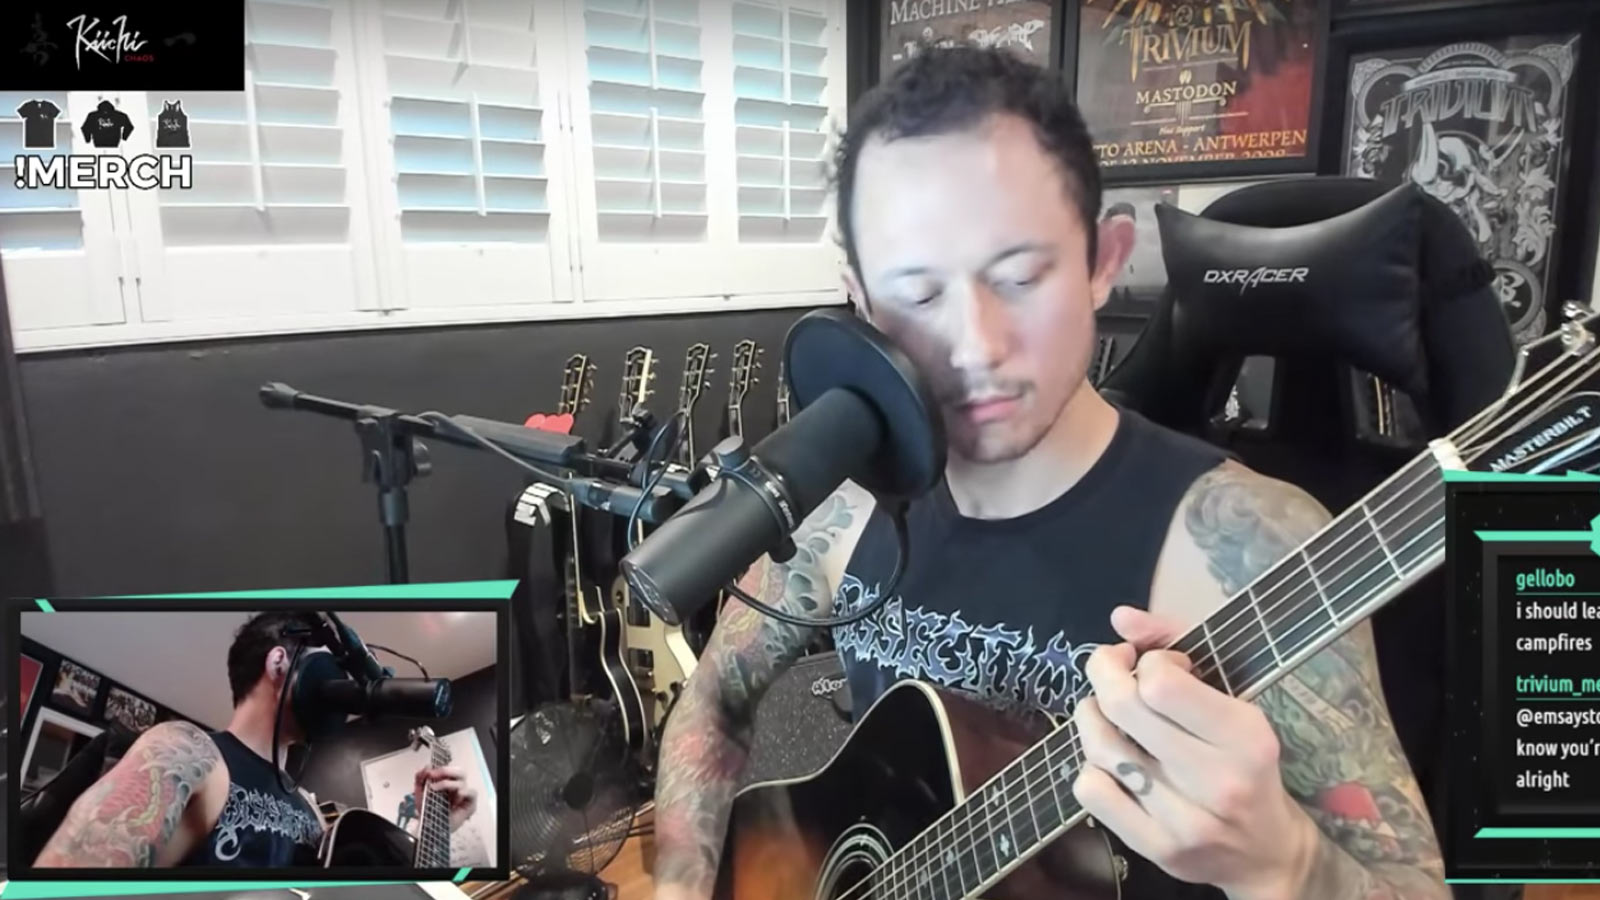 Watch Trivium's Matt Heafy Perform Touching Cannibal Corpse Acoustic Cover | Revolver1600 x 900